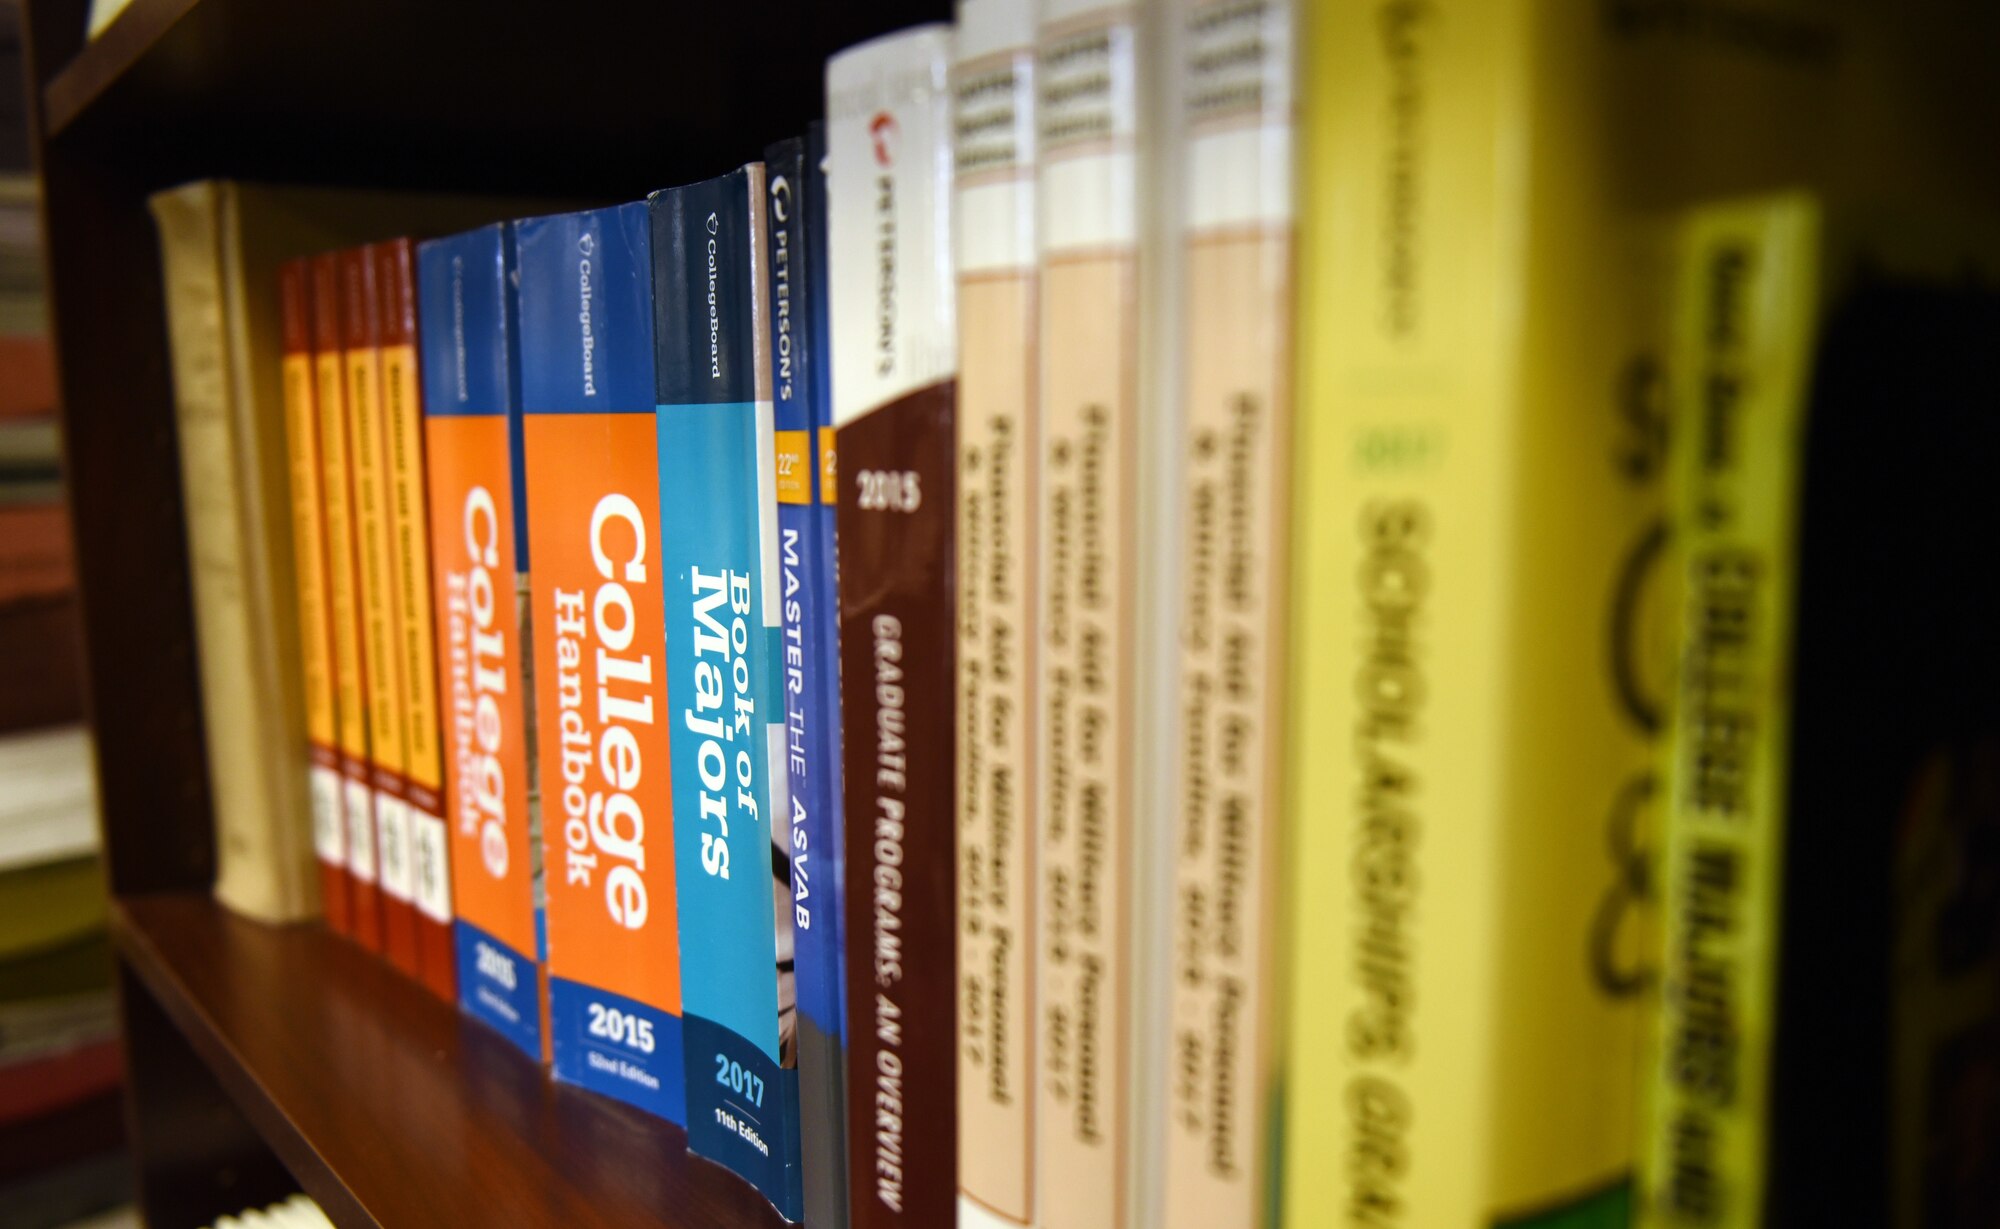 College textbooks are organized on a bookshelf in the education office at Tyndall Air Force Base, Fla., Feb. 14, 2018. The Tyndall Education office is designed to support Airmen in their efforts to further their education. (U.S. Air Force photo by Airman 1st Class Isaiah J. Soliz/Released)